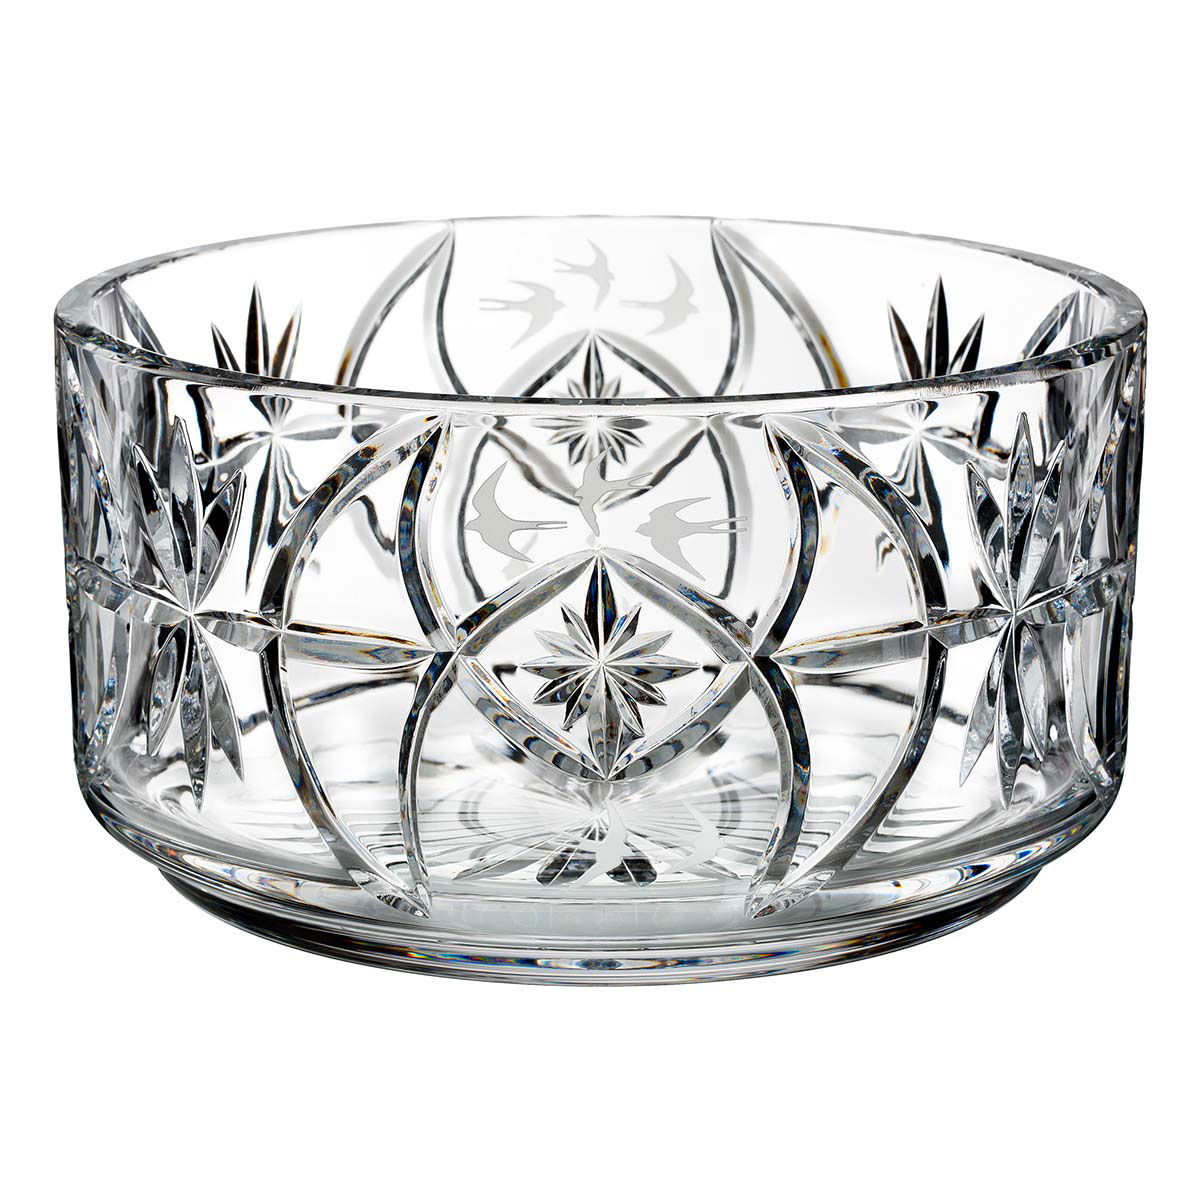 Waterford Crystal, House of Waterford Tom Cooke Swallow 10" Crystal Bowl, Limited Edition of 400